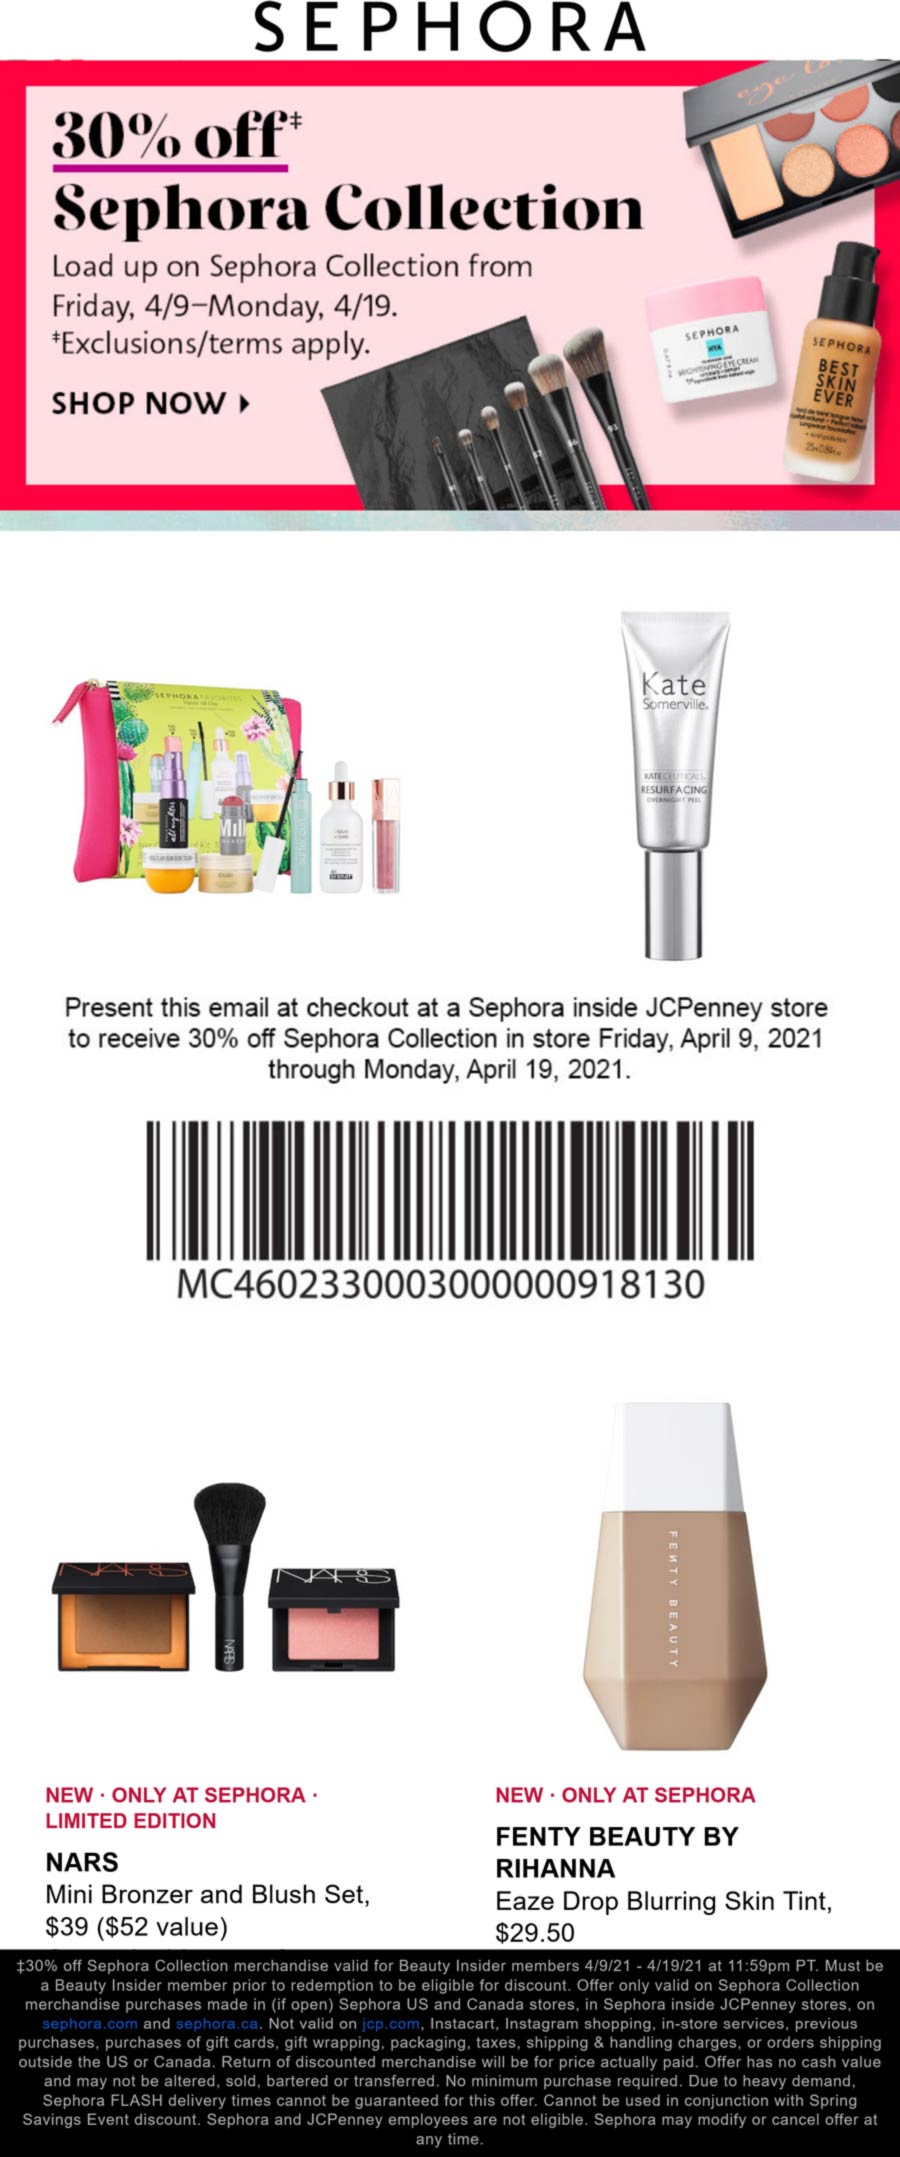 30 off the collection at Sephora sephora The Coupons App®